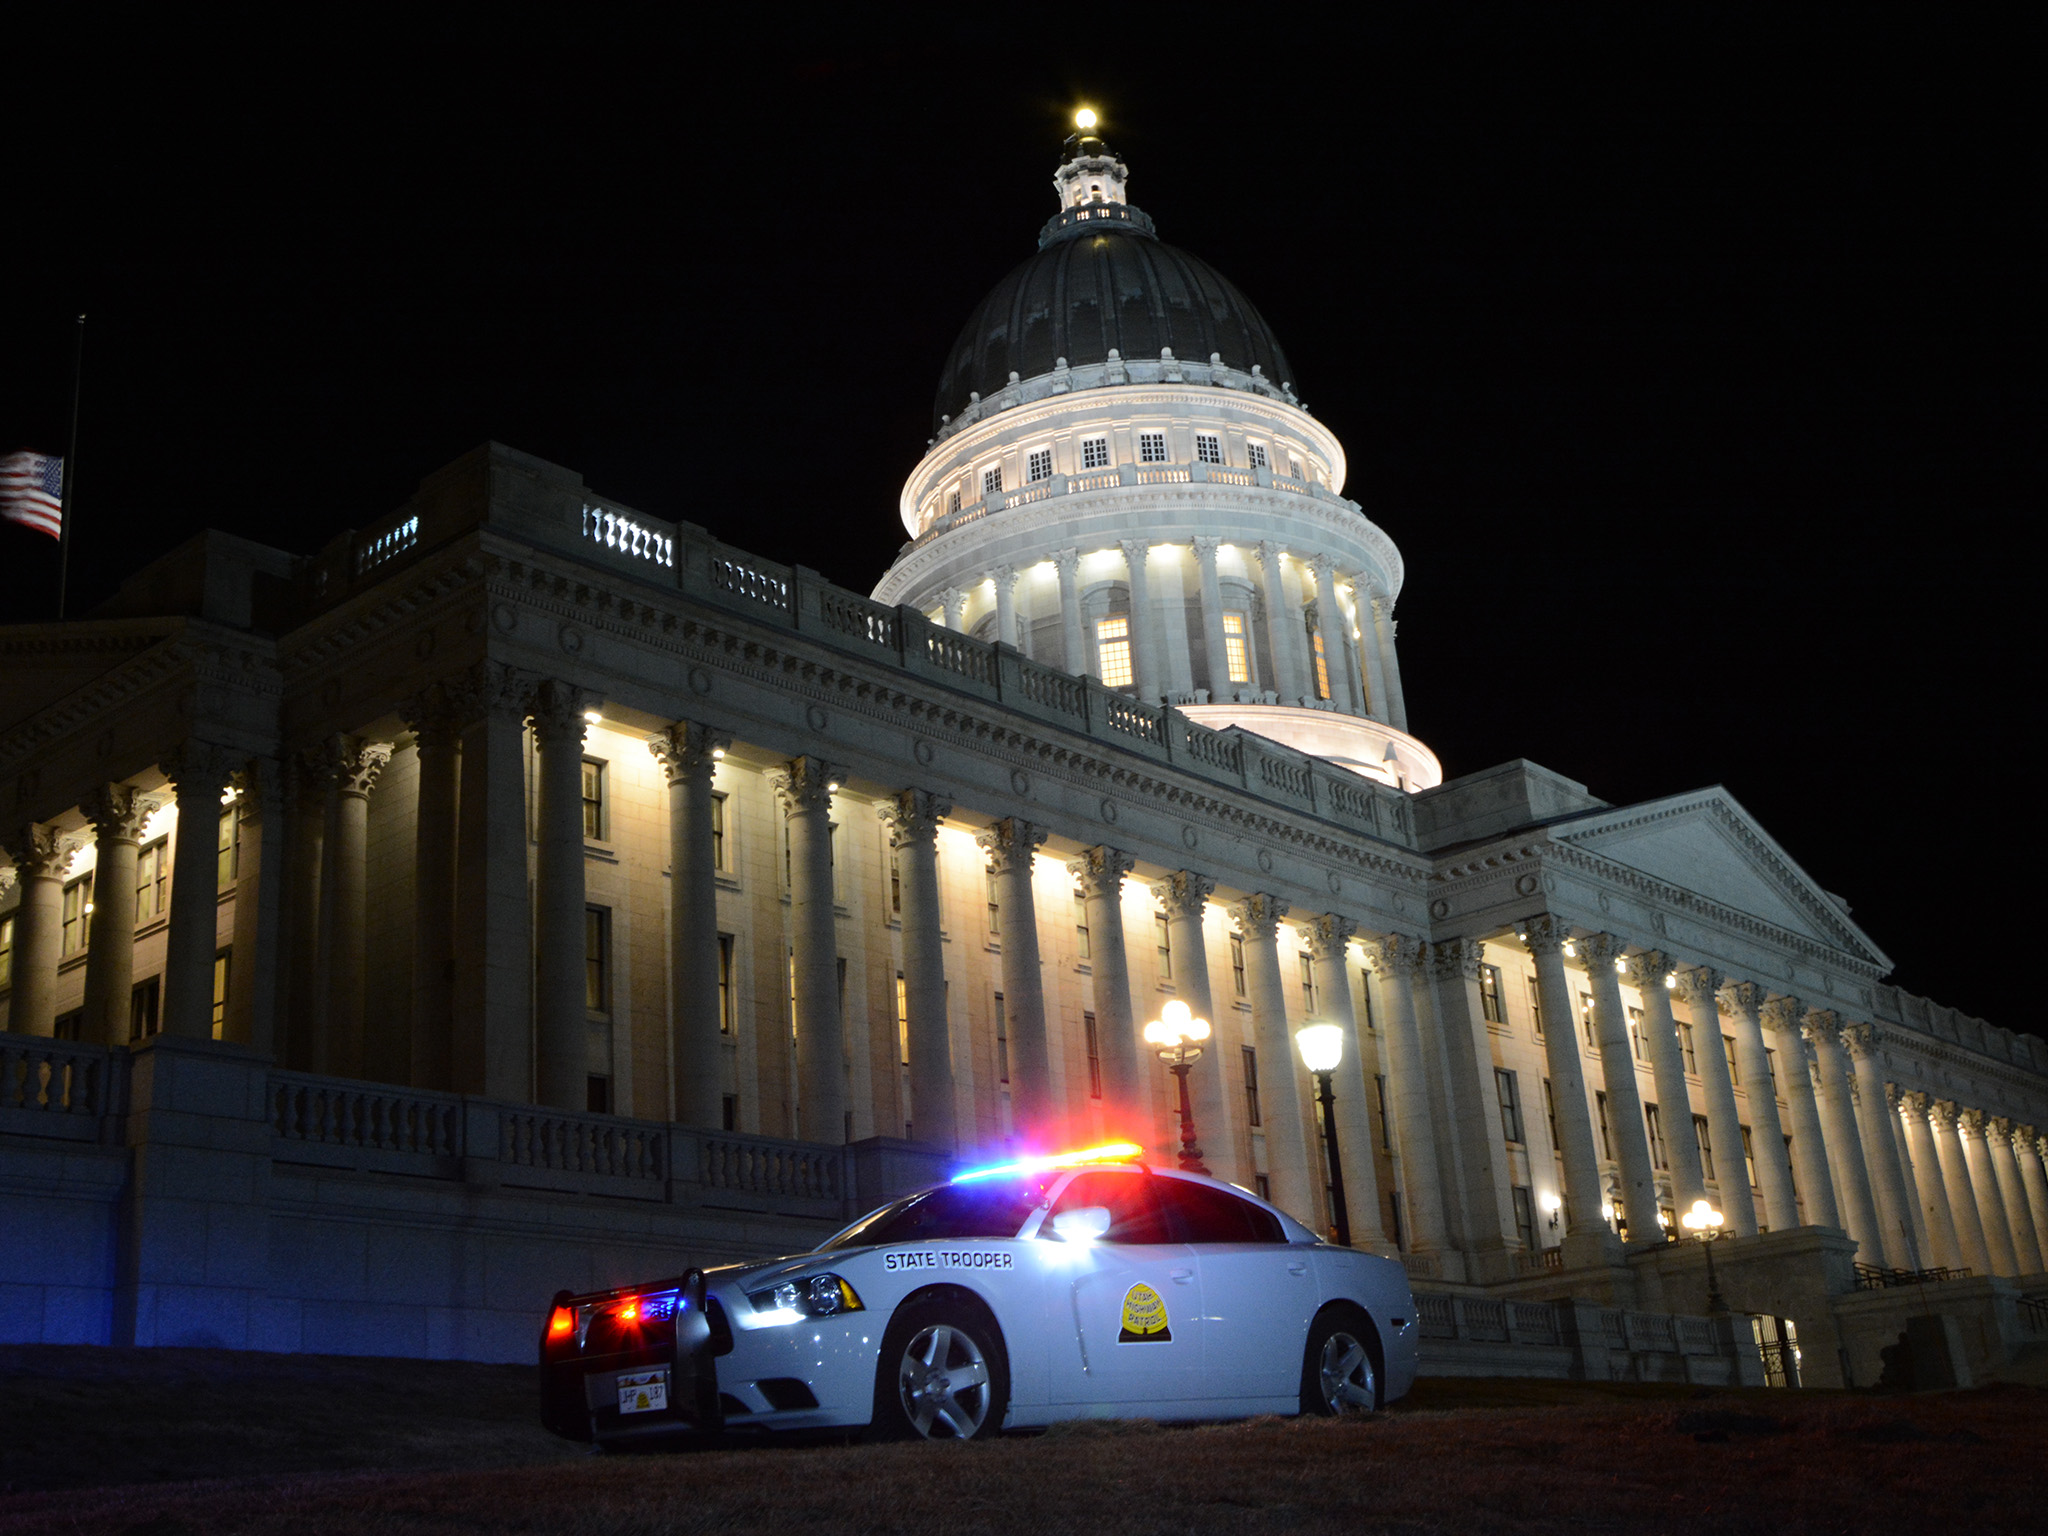 A UHP charger is parked in front of the state capitol building at night.